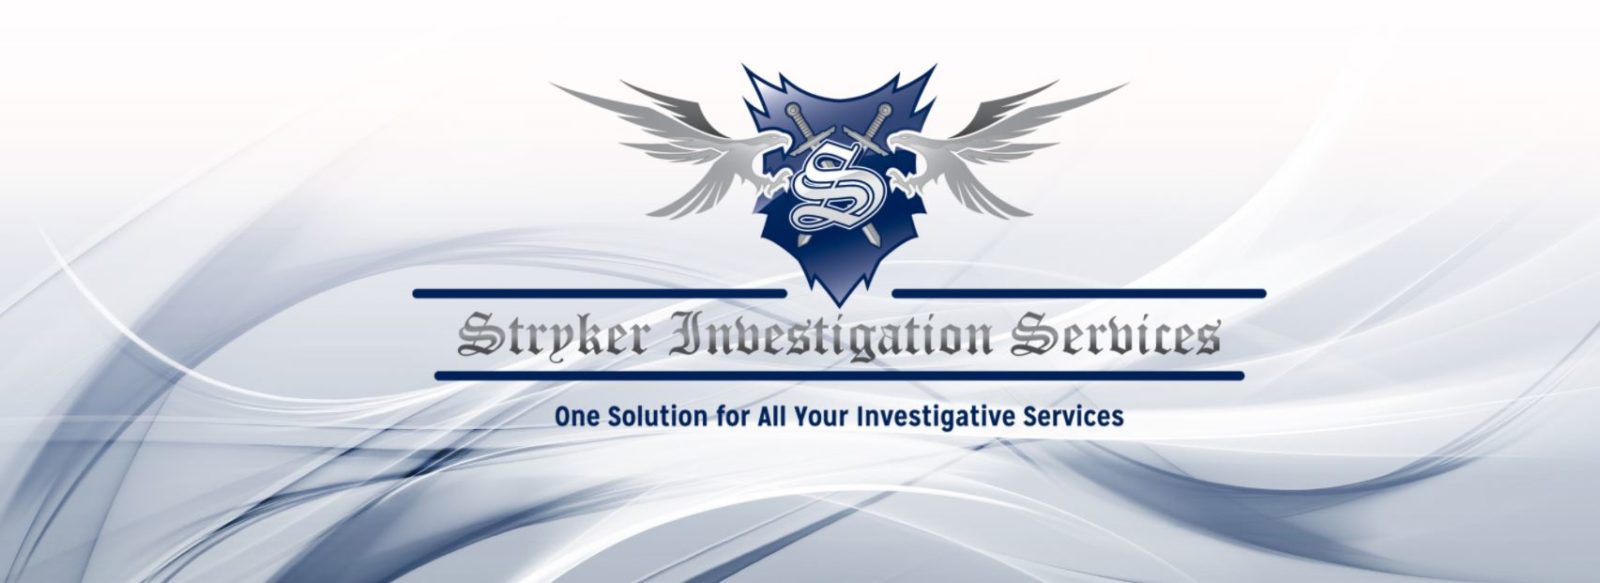 Looking for a Private Investigator to conduct an asset search? Stryker Investigation conducts asset searches in Campbell, Cupertino, Palo Alto, San Jose, The Alameda, West San Jose, East San Jose, San Thomas Expy, North San Jose, 1st Street, Milpitas, West Calavares Blvd, Los Gatos, Los Gatos Heights, North Santa Cruz Ave, Santa Cruz County, San Francisco, Market Street, California Street, Columbus Ave, Kearney Street Saratoga, Saratoga Ave, Private Investigator Stryker Investigations 1346 The Alameda San Jose. Need a private investigator for Surveillance, Background Check, Skiptrace and Locates, Statements, Interviews, expose infidelity confirmation of an affair unfaithful spouses, adultery, and cheating partners Private Investigator AOE/COE statements interviews, subrogation, alive and well checks, DWC record requests, Insurance Investigations, Workers Comp Investigations, Fraud Investigator ASSET SEARCH INVESTIGATIONS IN THE BAY AREA CALIFORNIA Private Investigator Asset Search, | Private Investigator Los Altos, Los Altos Hills, Los Gatos, Milpitas, Monte Sereno, Morgan Hill, Mountain View, Palo Alto, San Jose, Santa Clara, Saratoga and Sunnyvale, Santa Clara County – Silicon Valley – Asset Searches, Surveillance, Background Checks, Records Research, Evidence Gathering, AOE/COE Statements, Accident Scene, Subrogation, Skip-trace, Alive and Well, Social Media Searches, Workers' Comp Investigations, Fraud, Hospital and Pharmacy Checks, Infidelity Surveillance...Is Your Spouse Cheating? | Child Custody Monitoring and Investigations | Private Investigator Oakland, Hayward, Fremont, Berkeley, and Richmond, Alameda, Castro Valley, Newark, Union City, Emeryville, Albany, San Leandro, San Pablo, Crockett, El Sobrante, Pinole, San Lorenzo, Hercules, Rodeo, Piedmont, and El Cerrito, Walnut Creek 